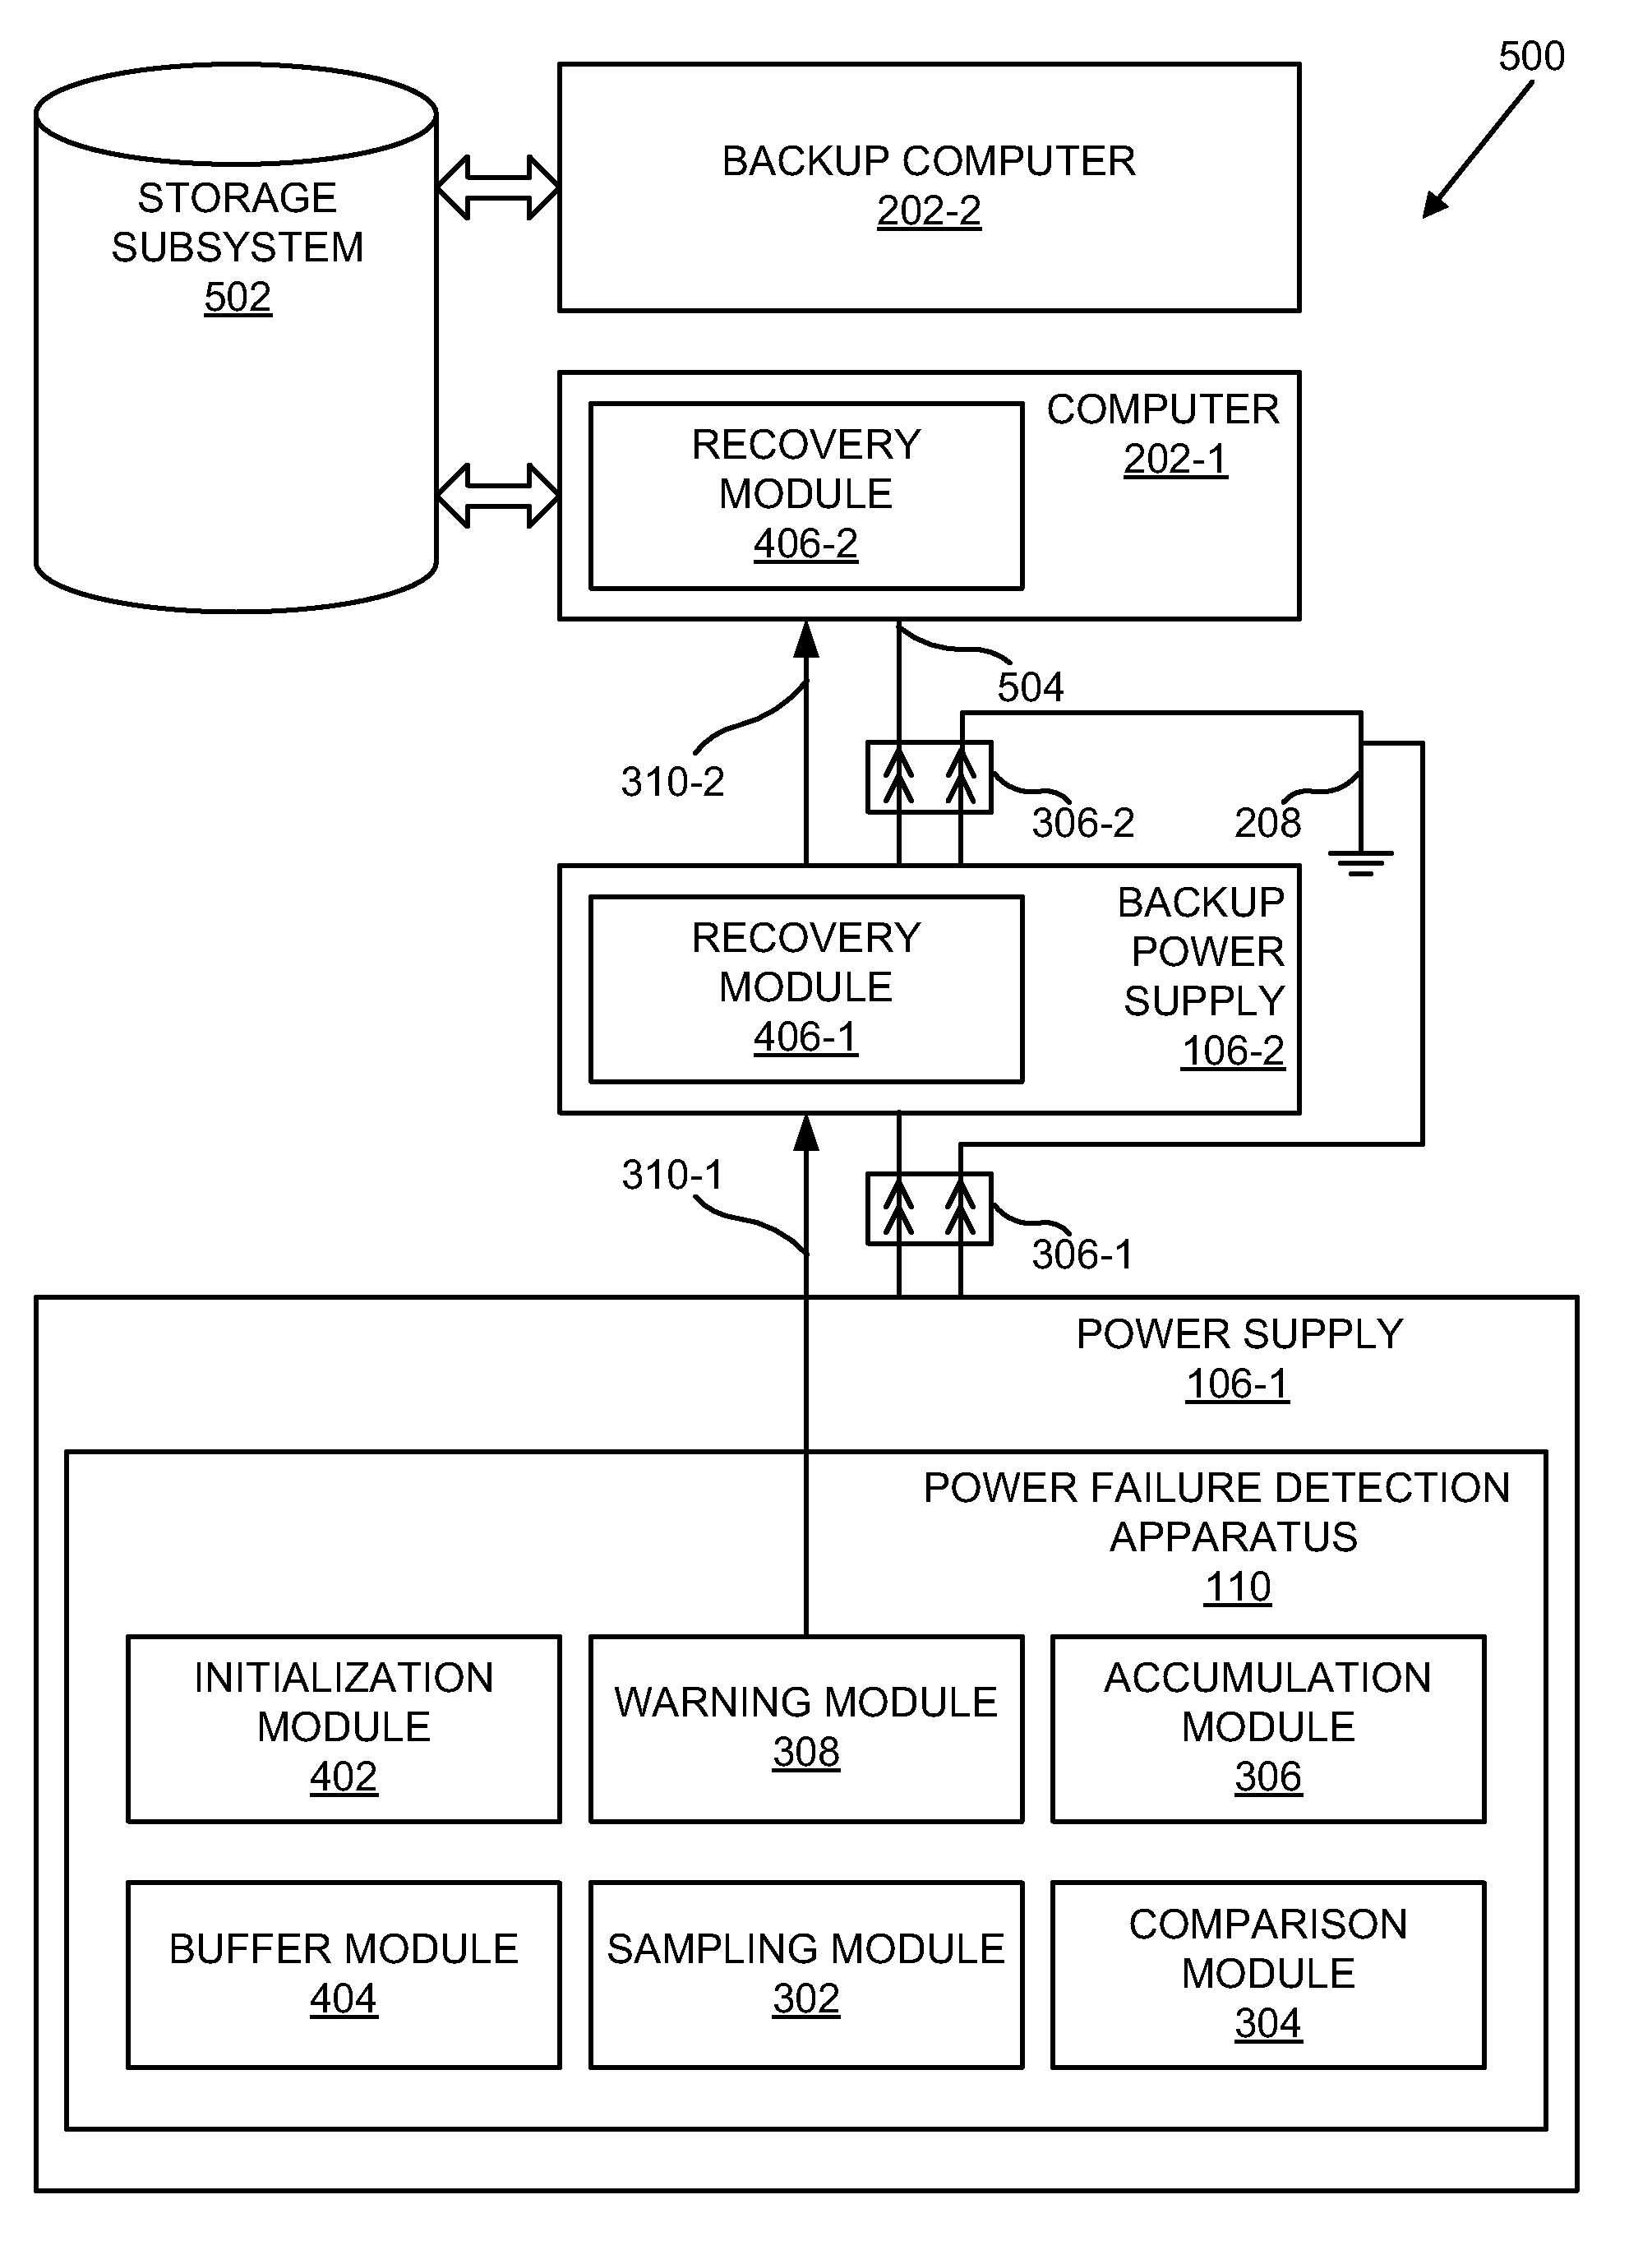 Apparatus, system, and method for precise early detection of AC power loss